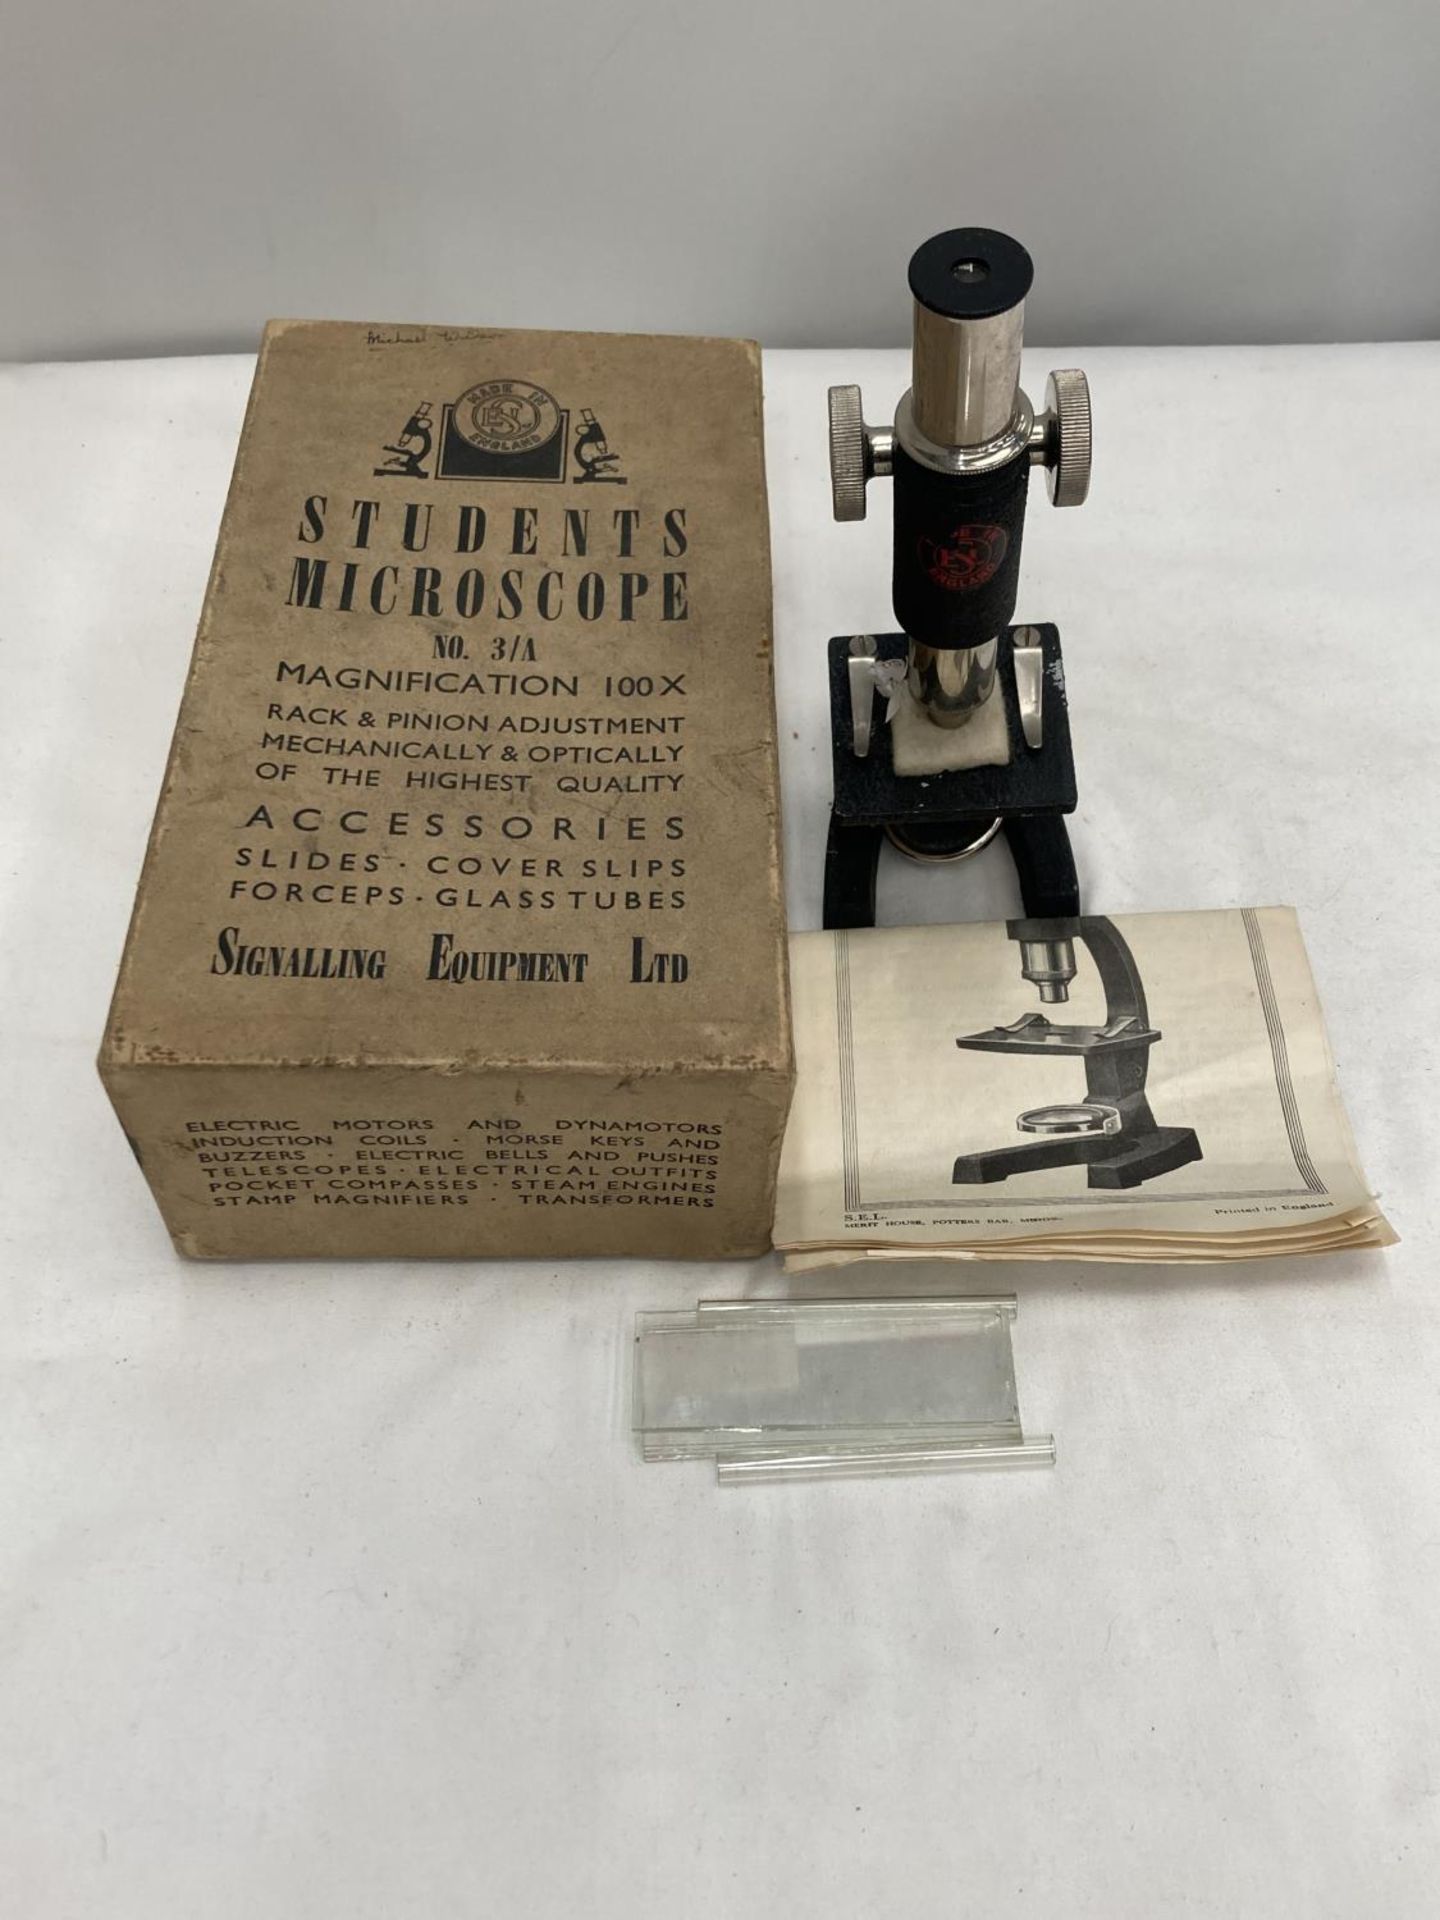 A BOXED STUDENTS MICROSCOPE MADE BY SIGNALLING EQUIPMENT LIMITED - Image 2 of 3